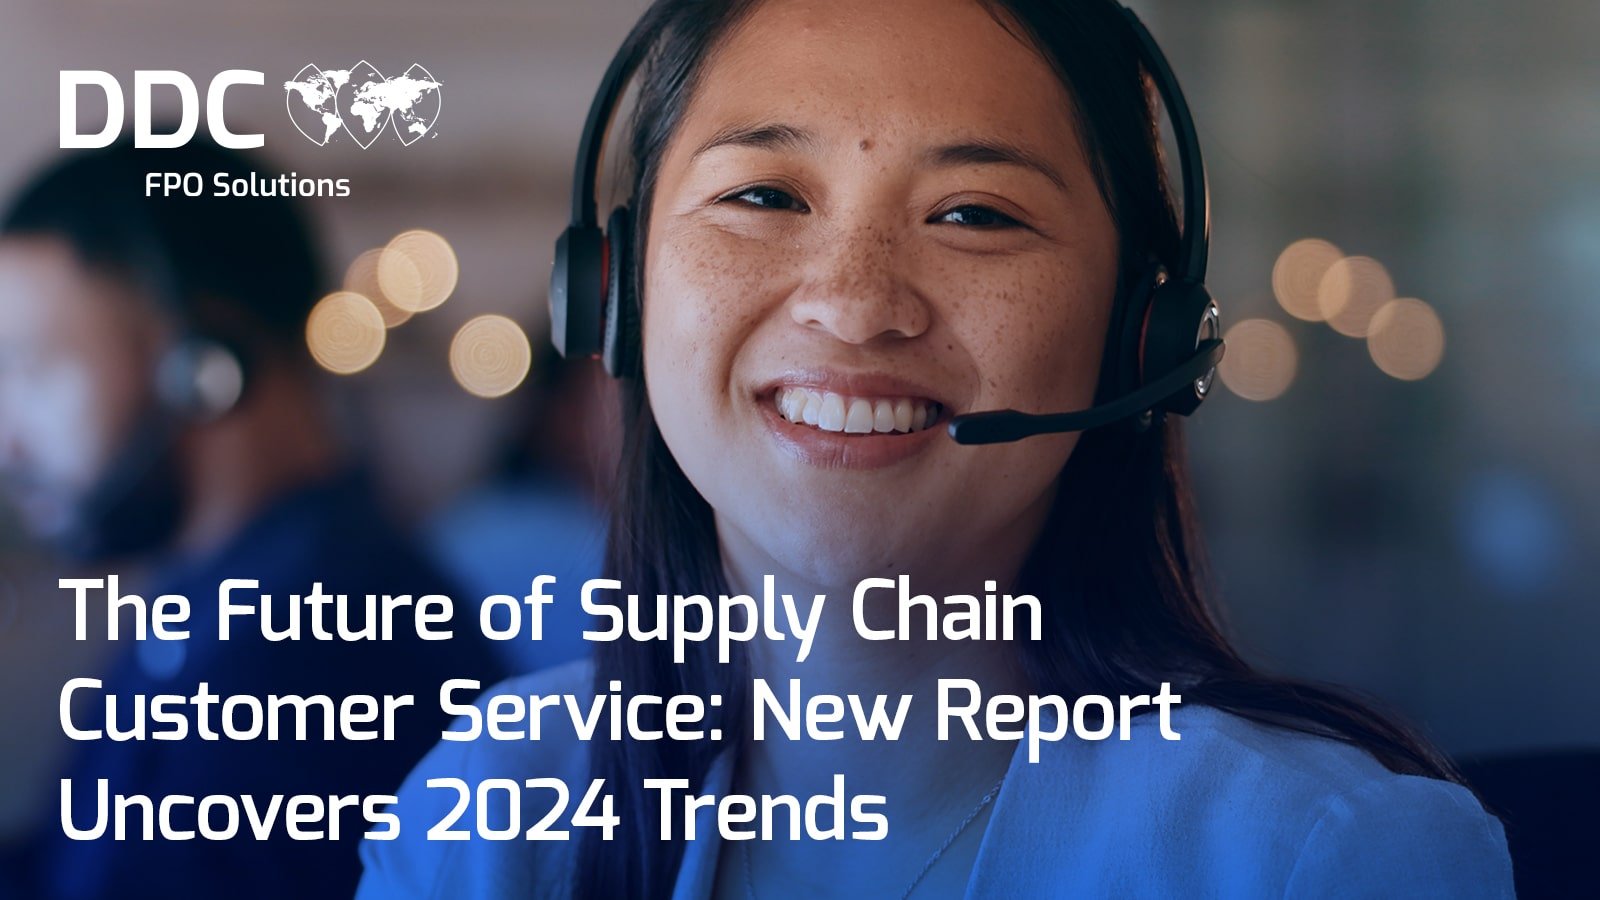 The Future of Supply Chain Customer Service: New Report Uncovers 2024 Trends